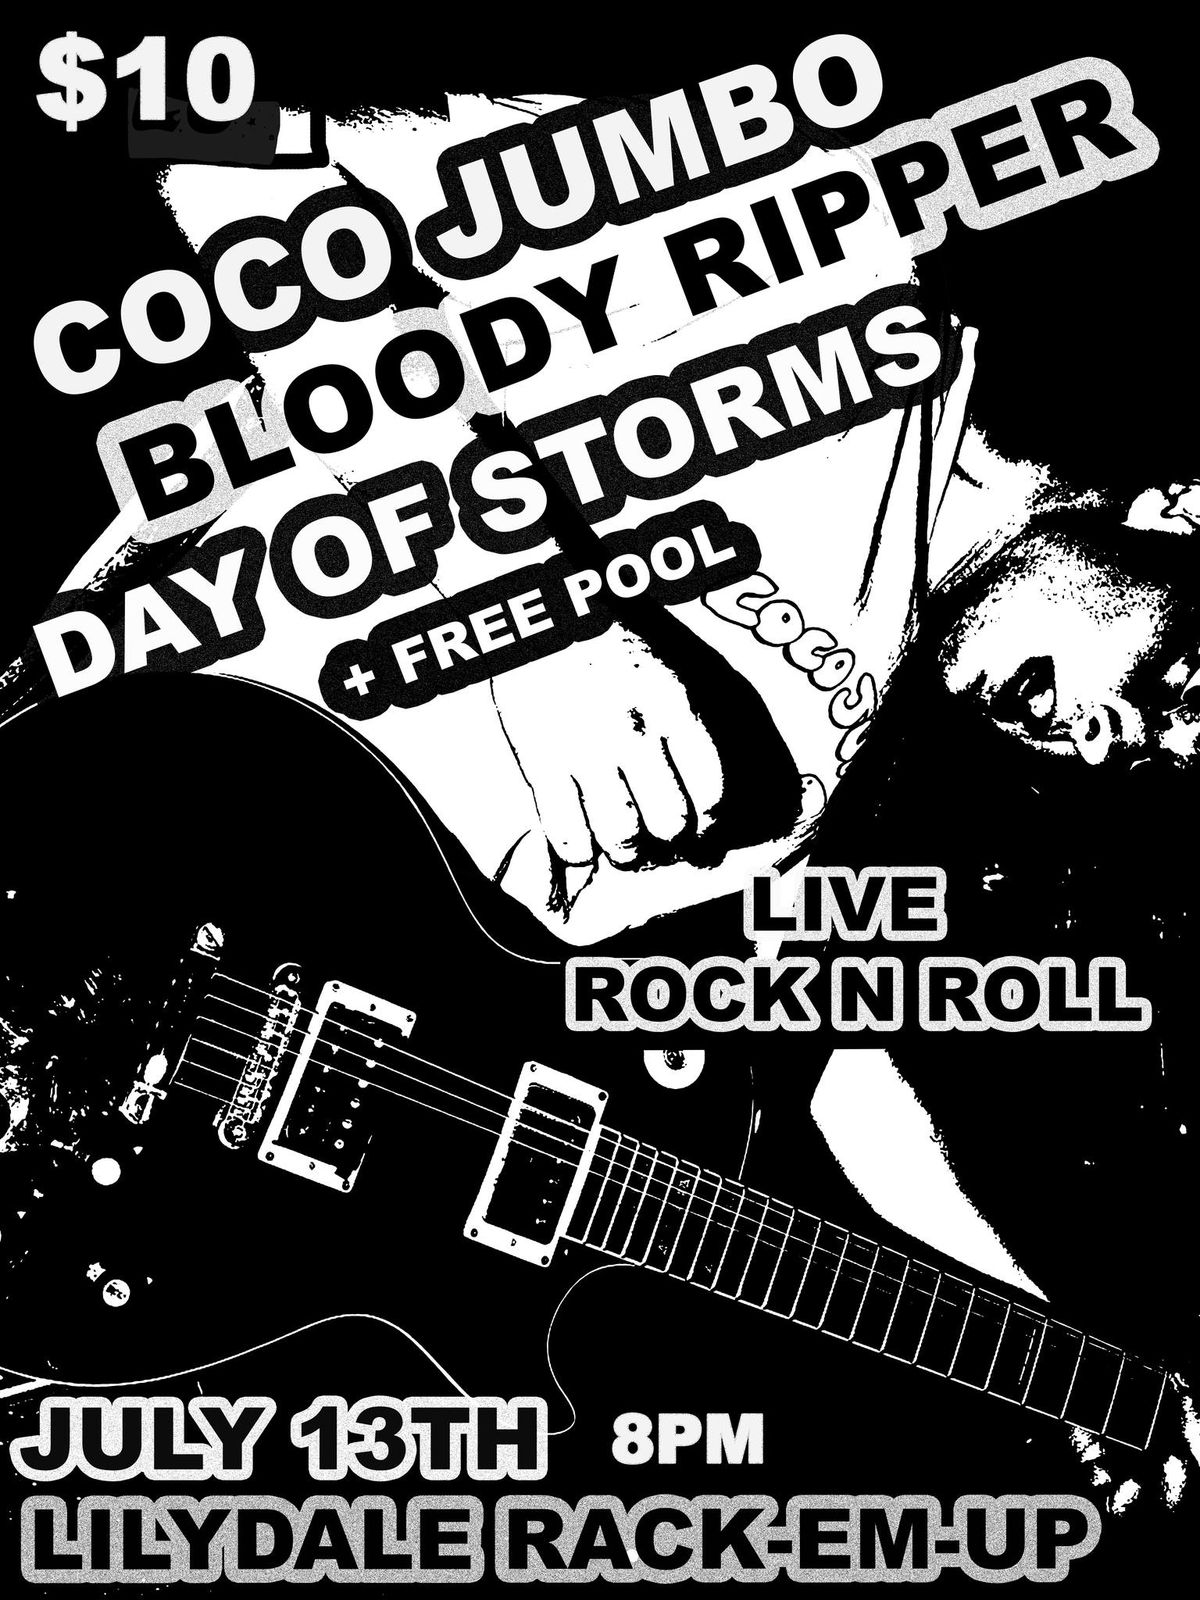 Coco Jumbo, Bloody Ripper, A Day of Storms - Live at Rack-em-up from 8pm Sat 13th July